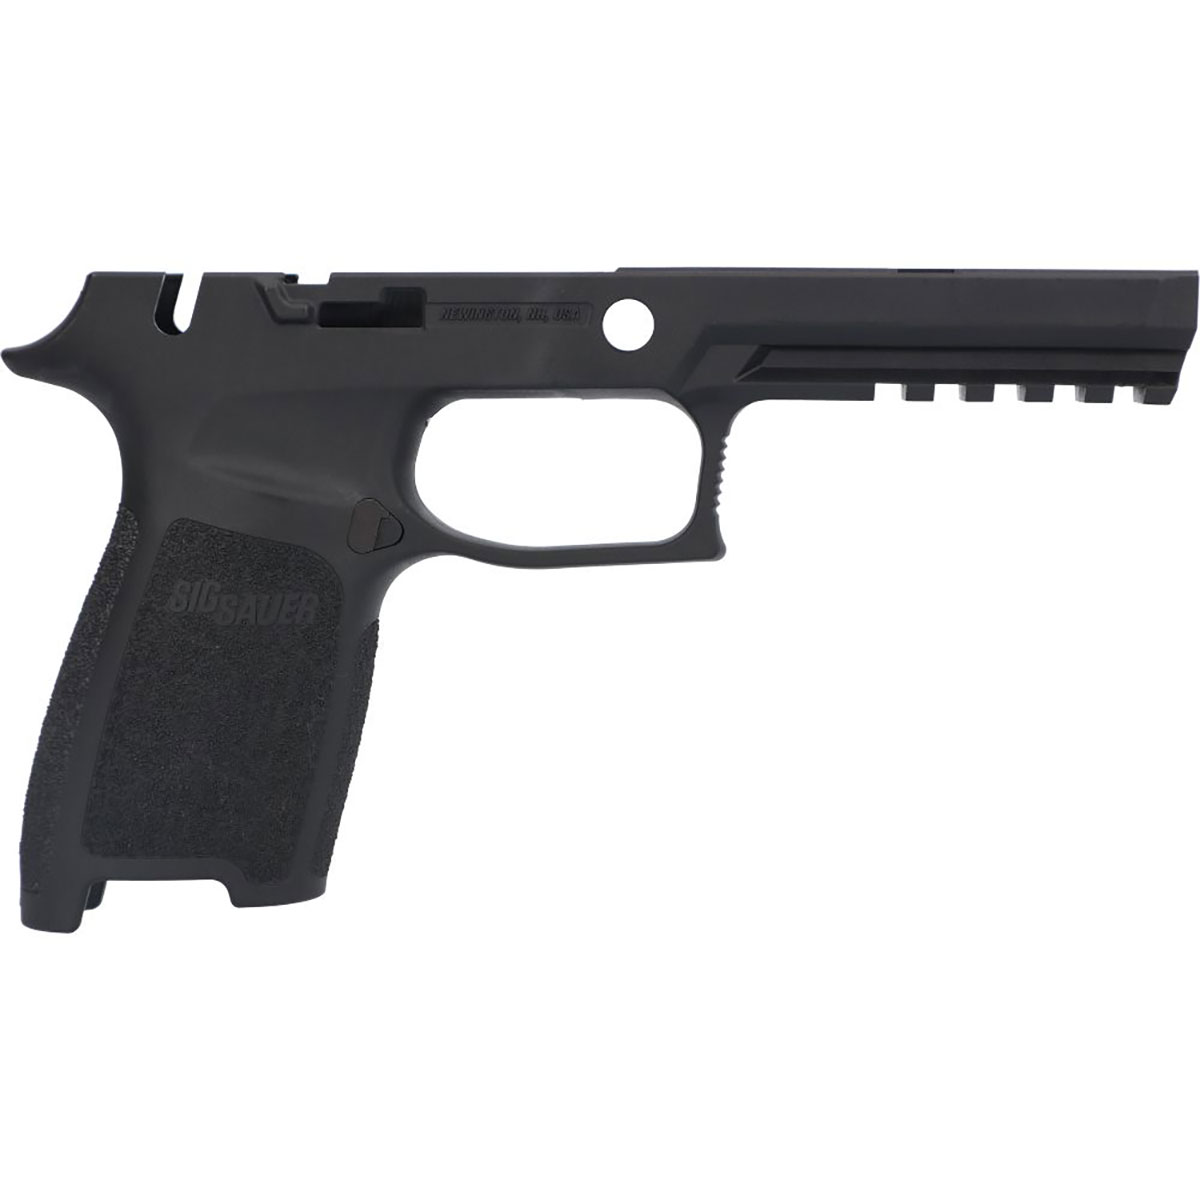 SIG SAUER, INC. - GRIP MODULE W/MANUAL SAFETY FOR SIG SAUER® P320 FULL SIZE